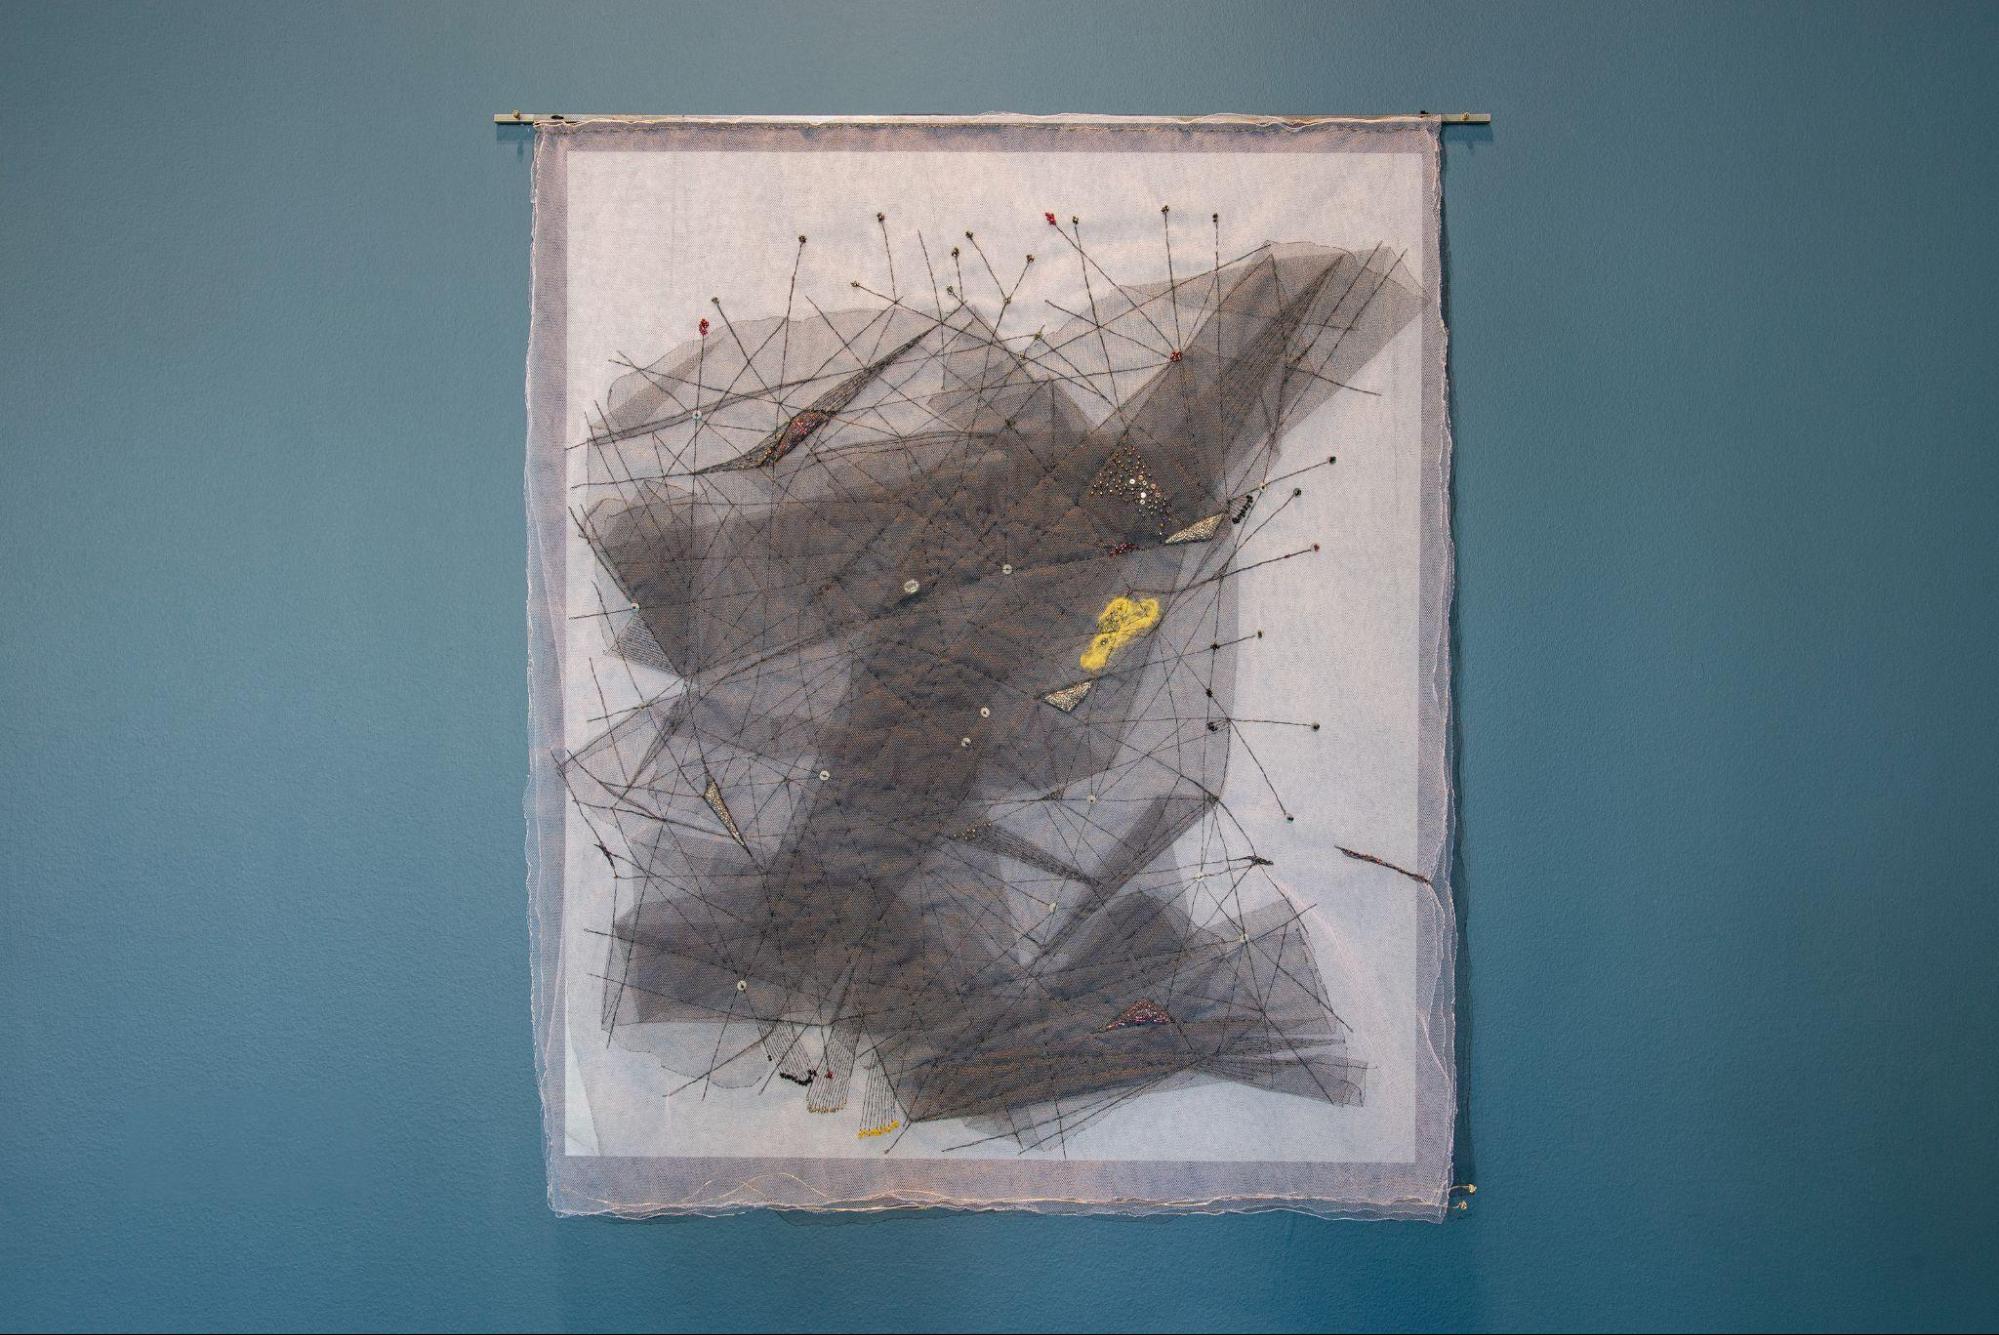 Resignation #3, 2020, Tulle and mixed media, 30” x 24”, photos by Ryan Edmund Thiel